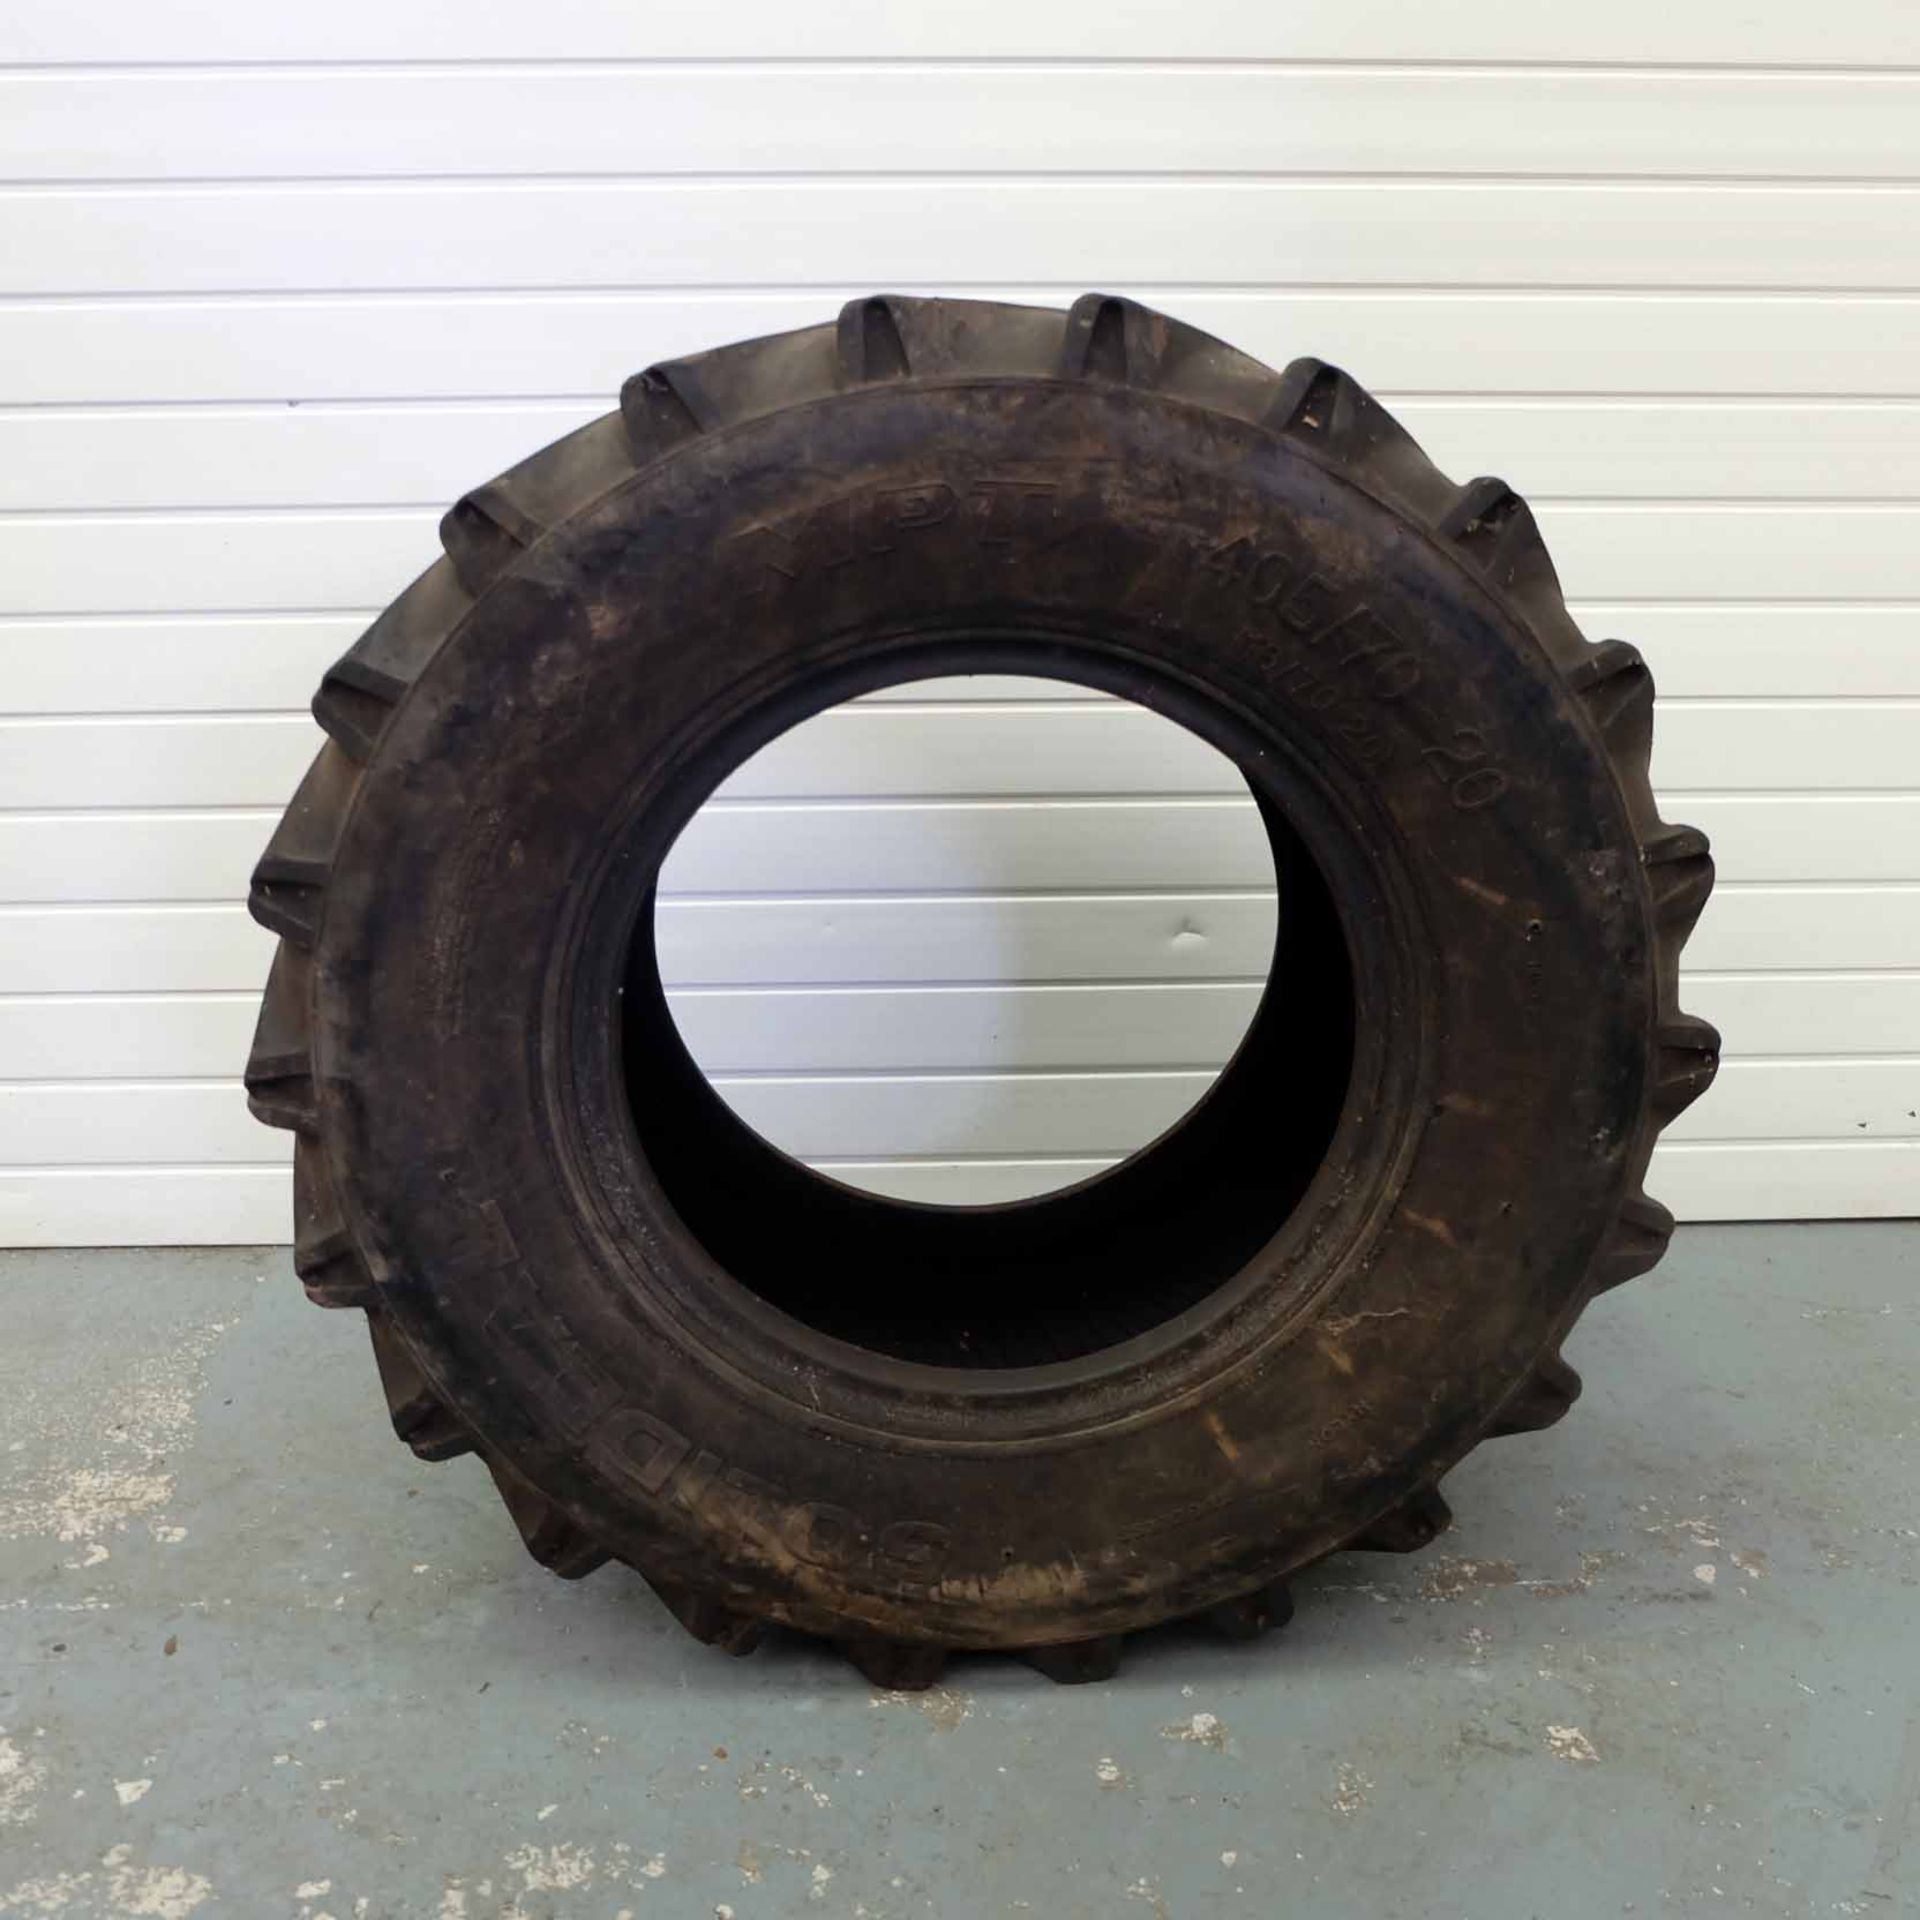 Telehandler Tyre. Solideal MPT 405/70-2. (16/70-20) - Image 5 of 6